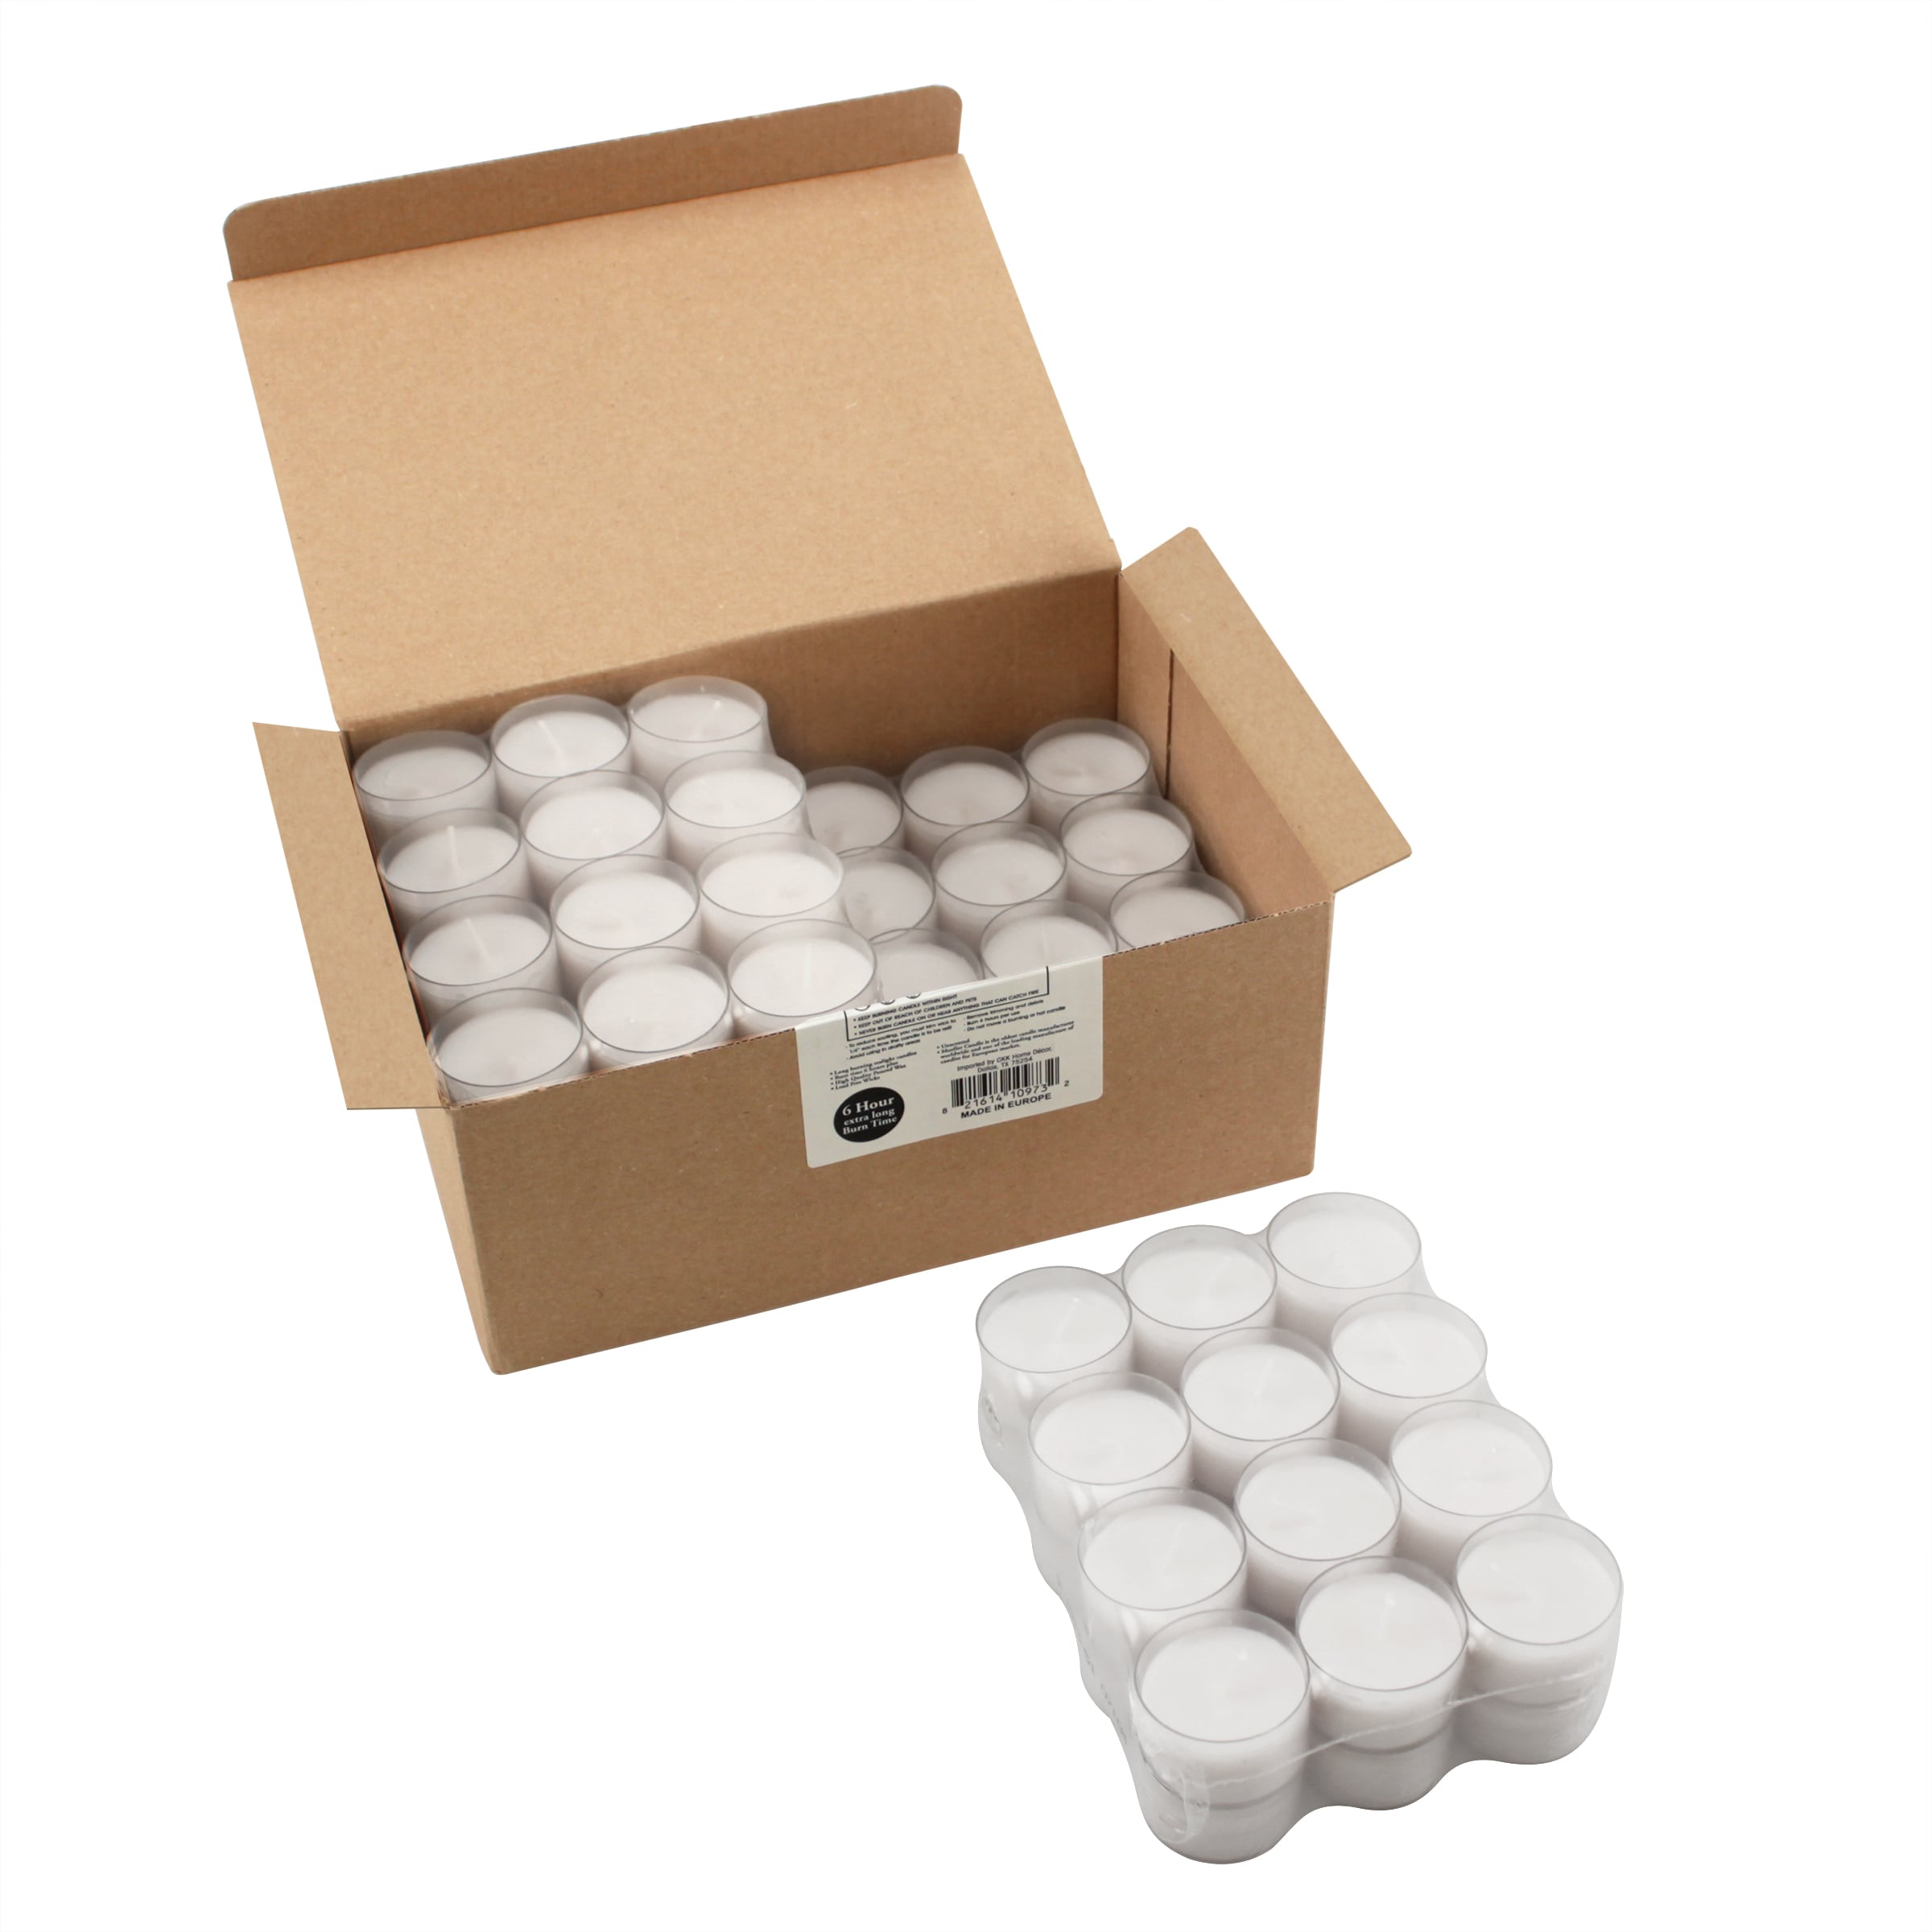 Stonebriar 6-7 Hour Long Burning Unscented Clear Cup Tea Light Candles 96 Pack,